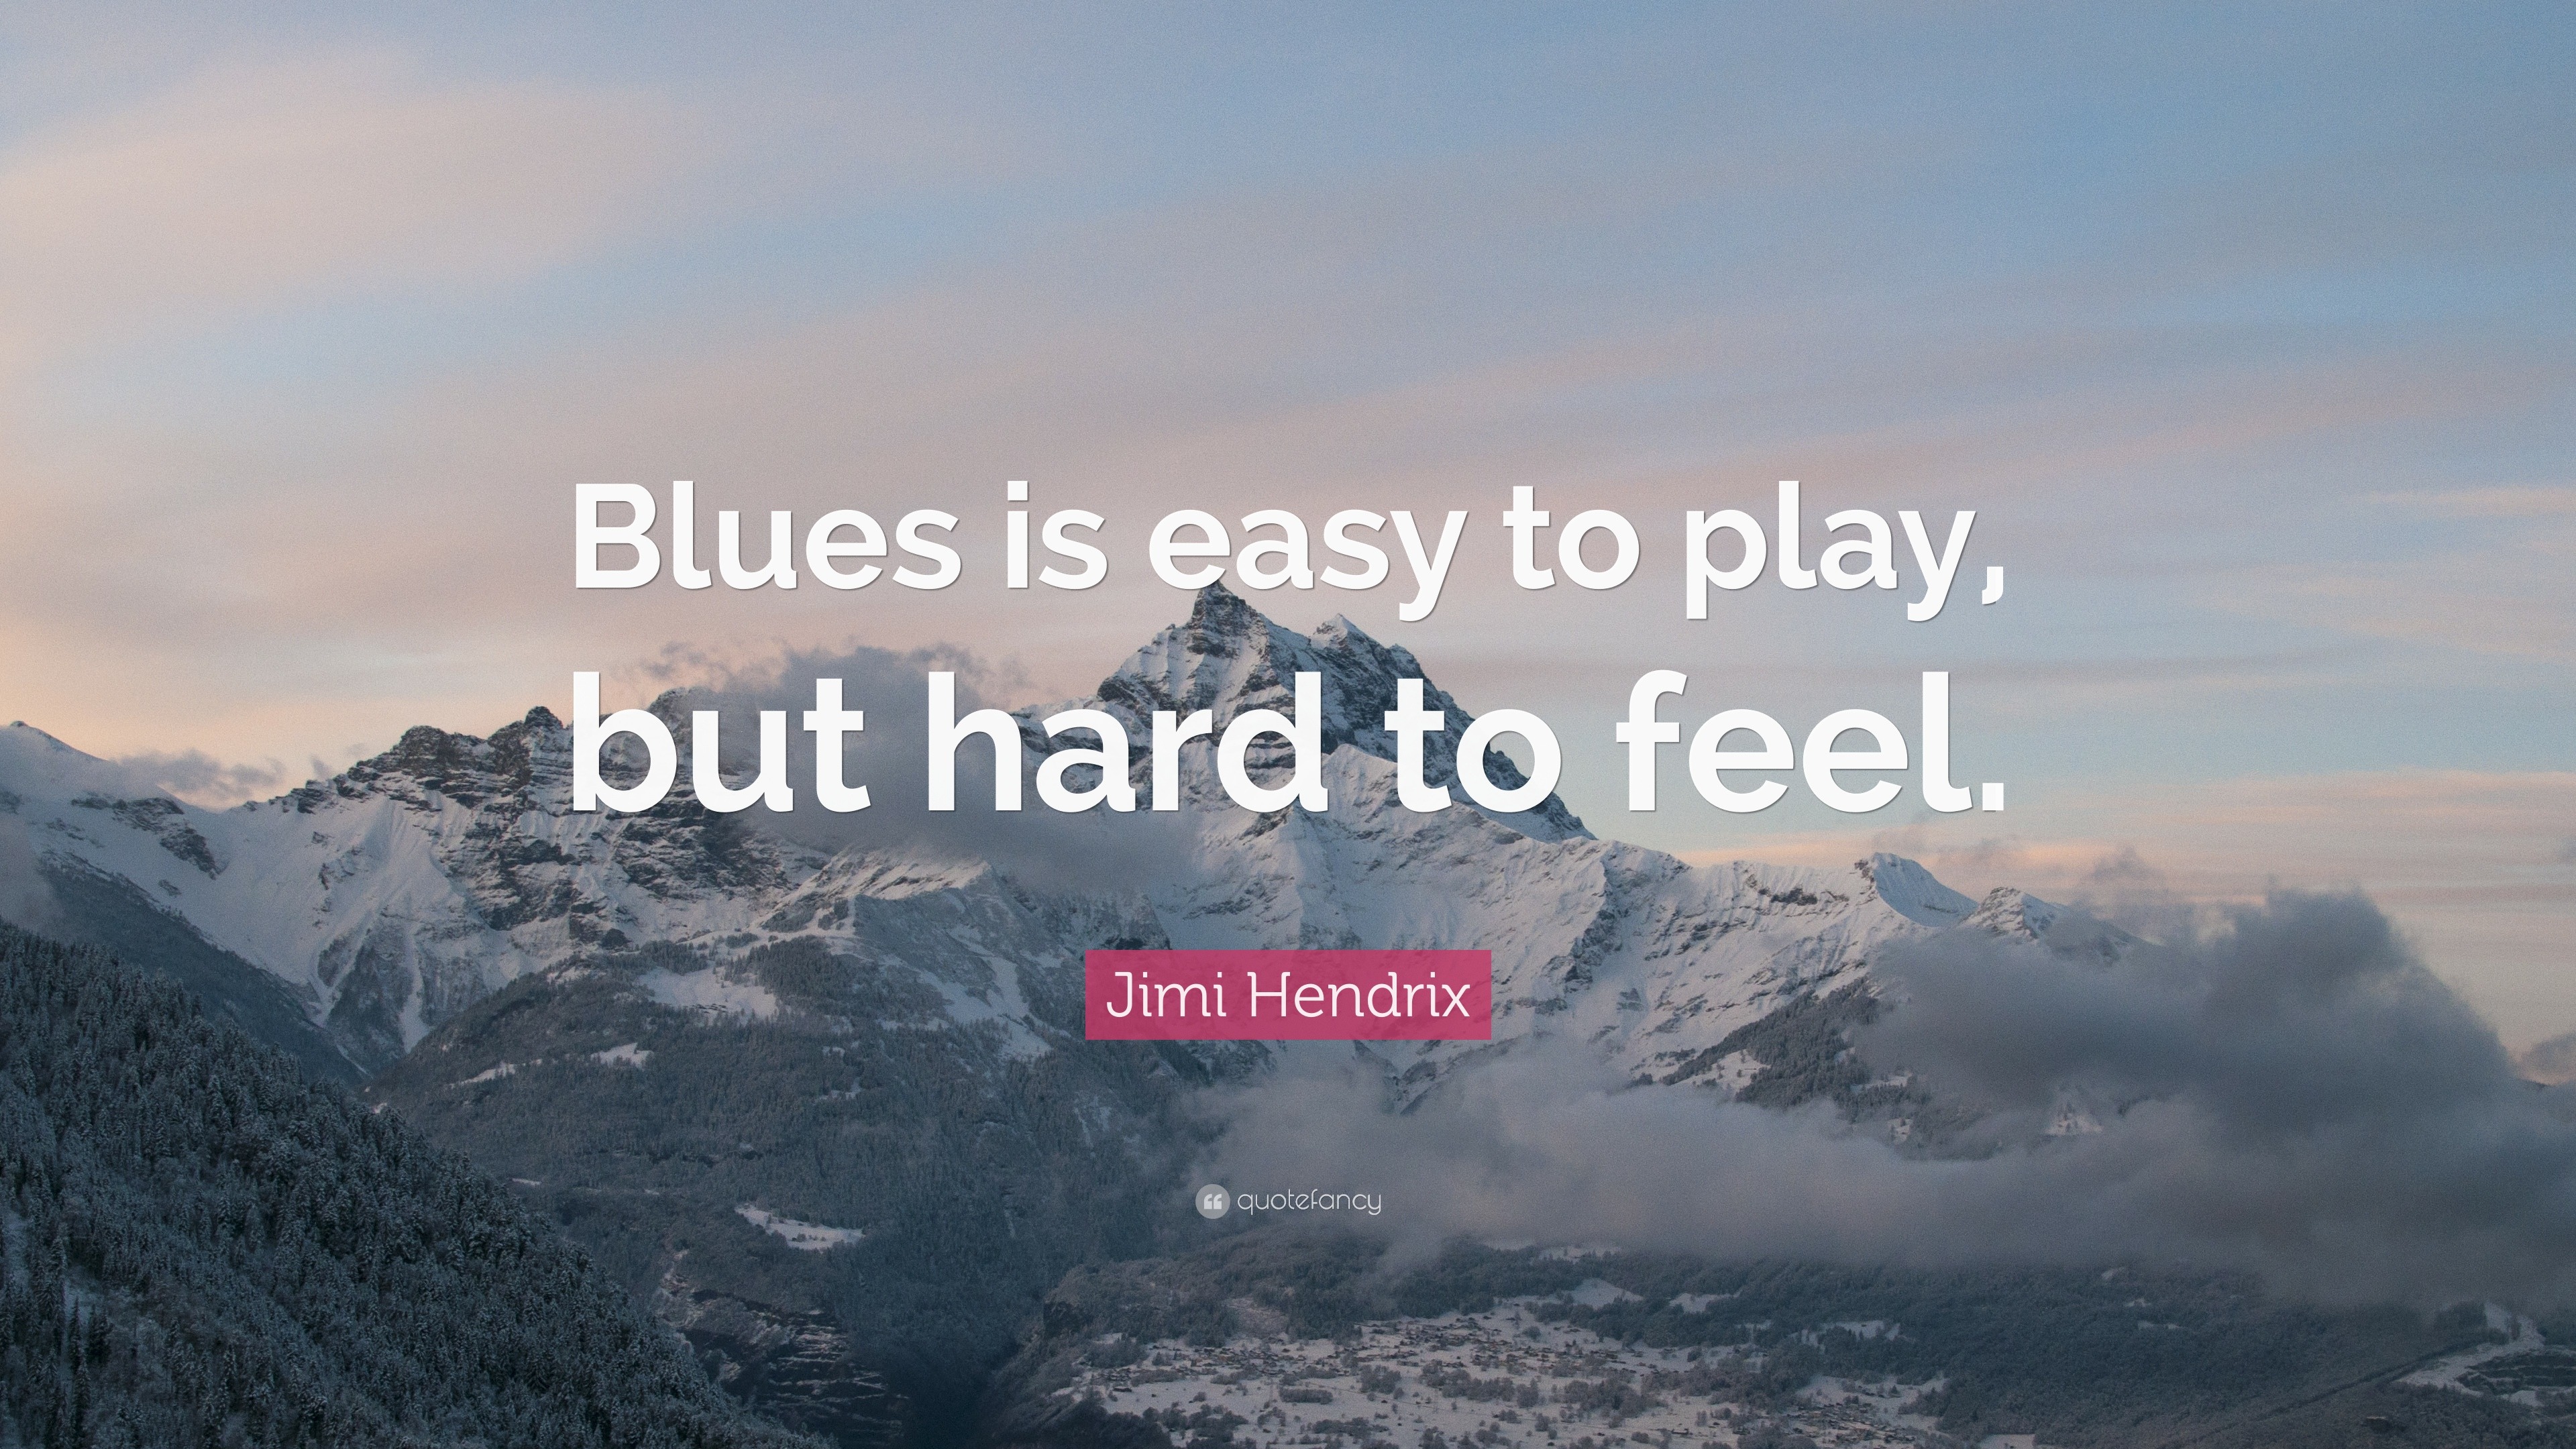 BUT HARD TO FEEL Jimi Hendrix Autograph Quote Tee Shirt  BLUES IS EASY TO PLAY 